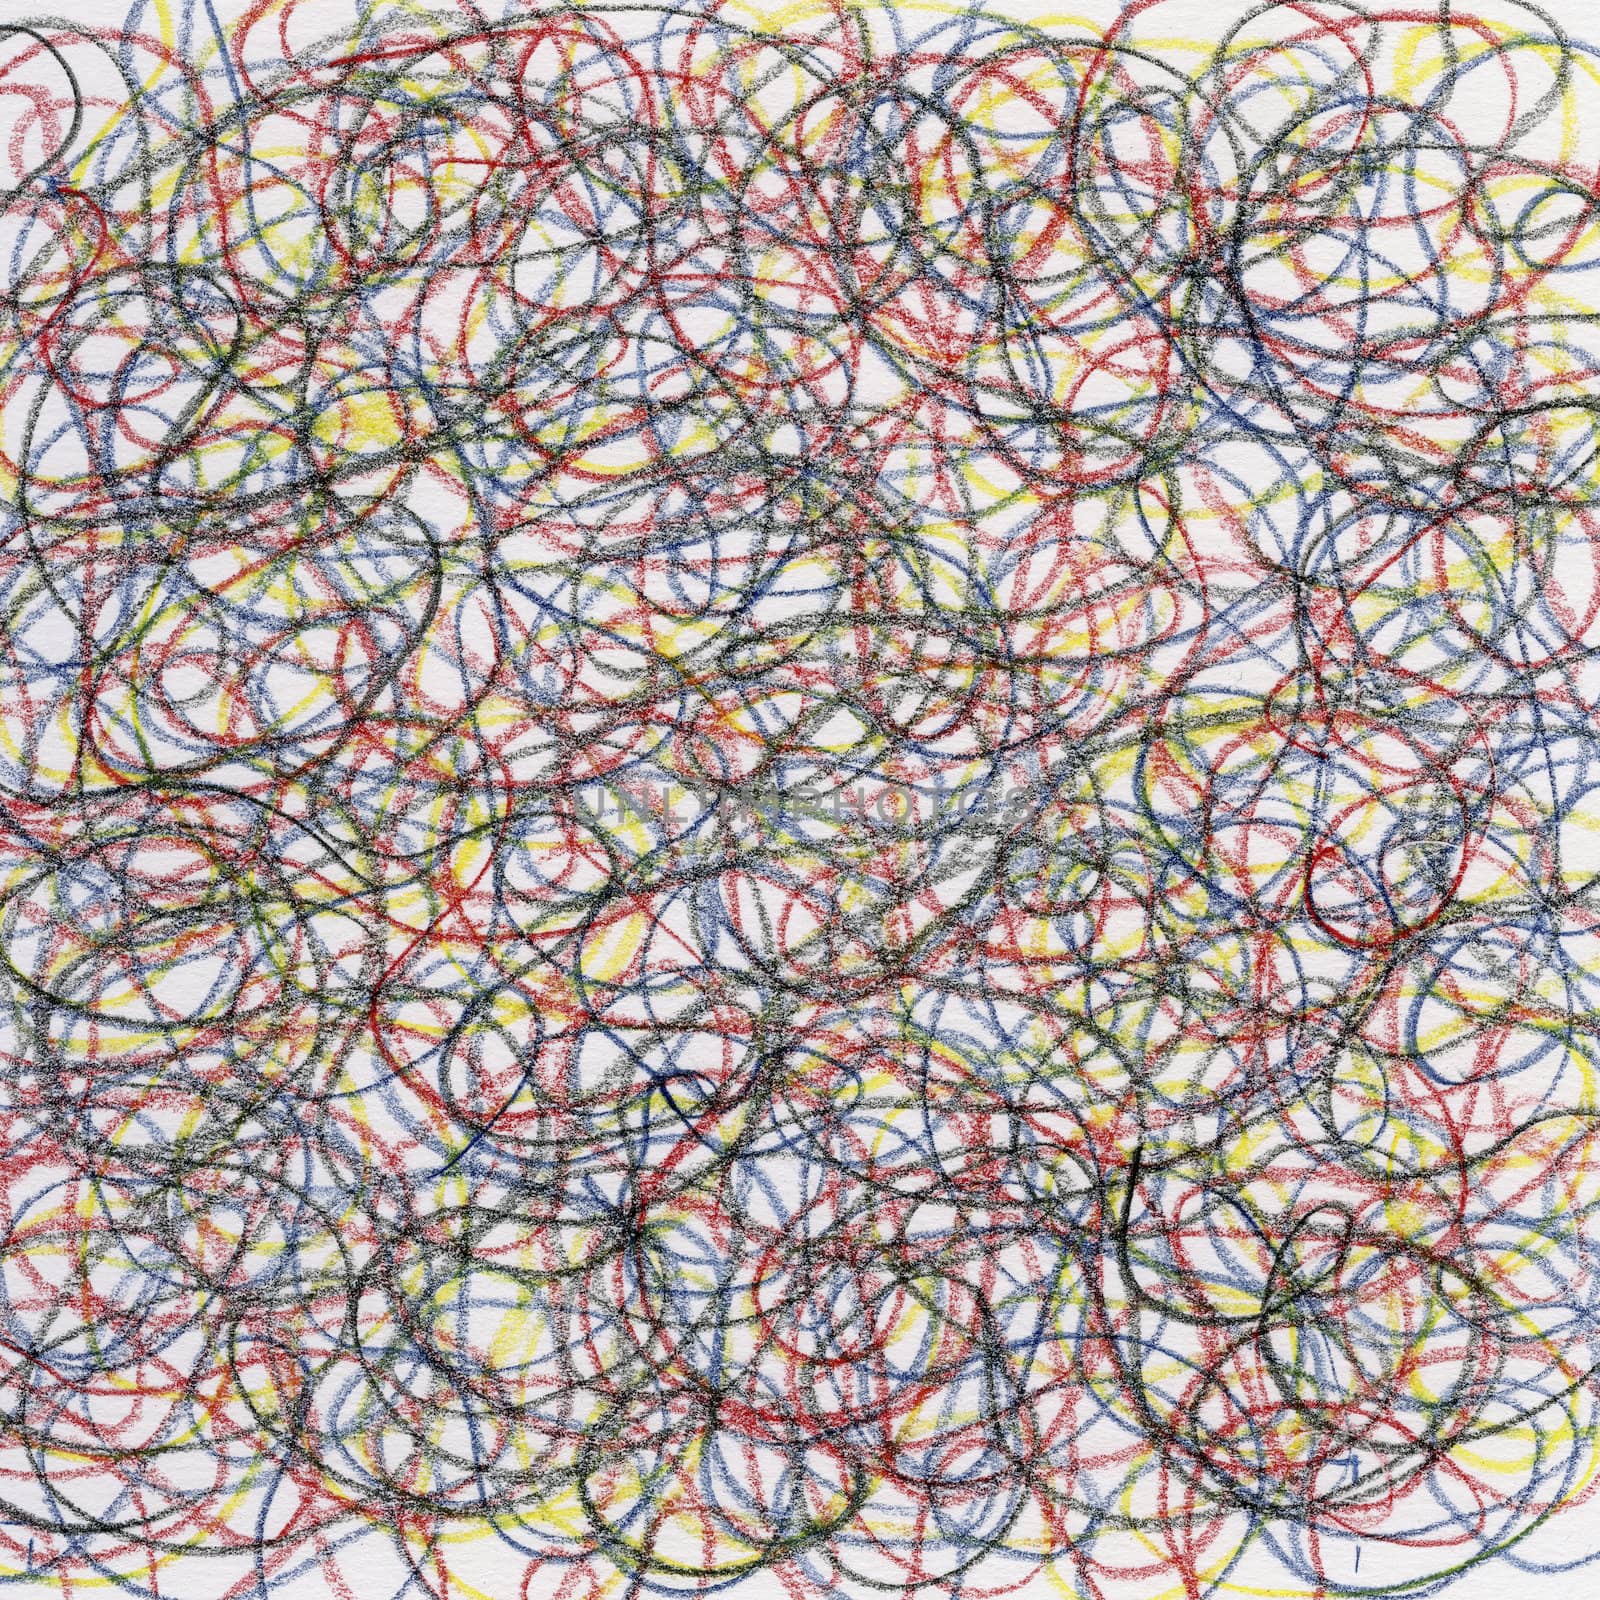 hand-drawn crayon circular scribble on white paper, red, blue, black and yellow lines